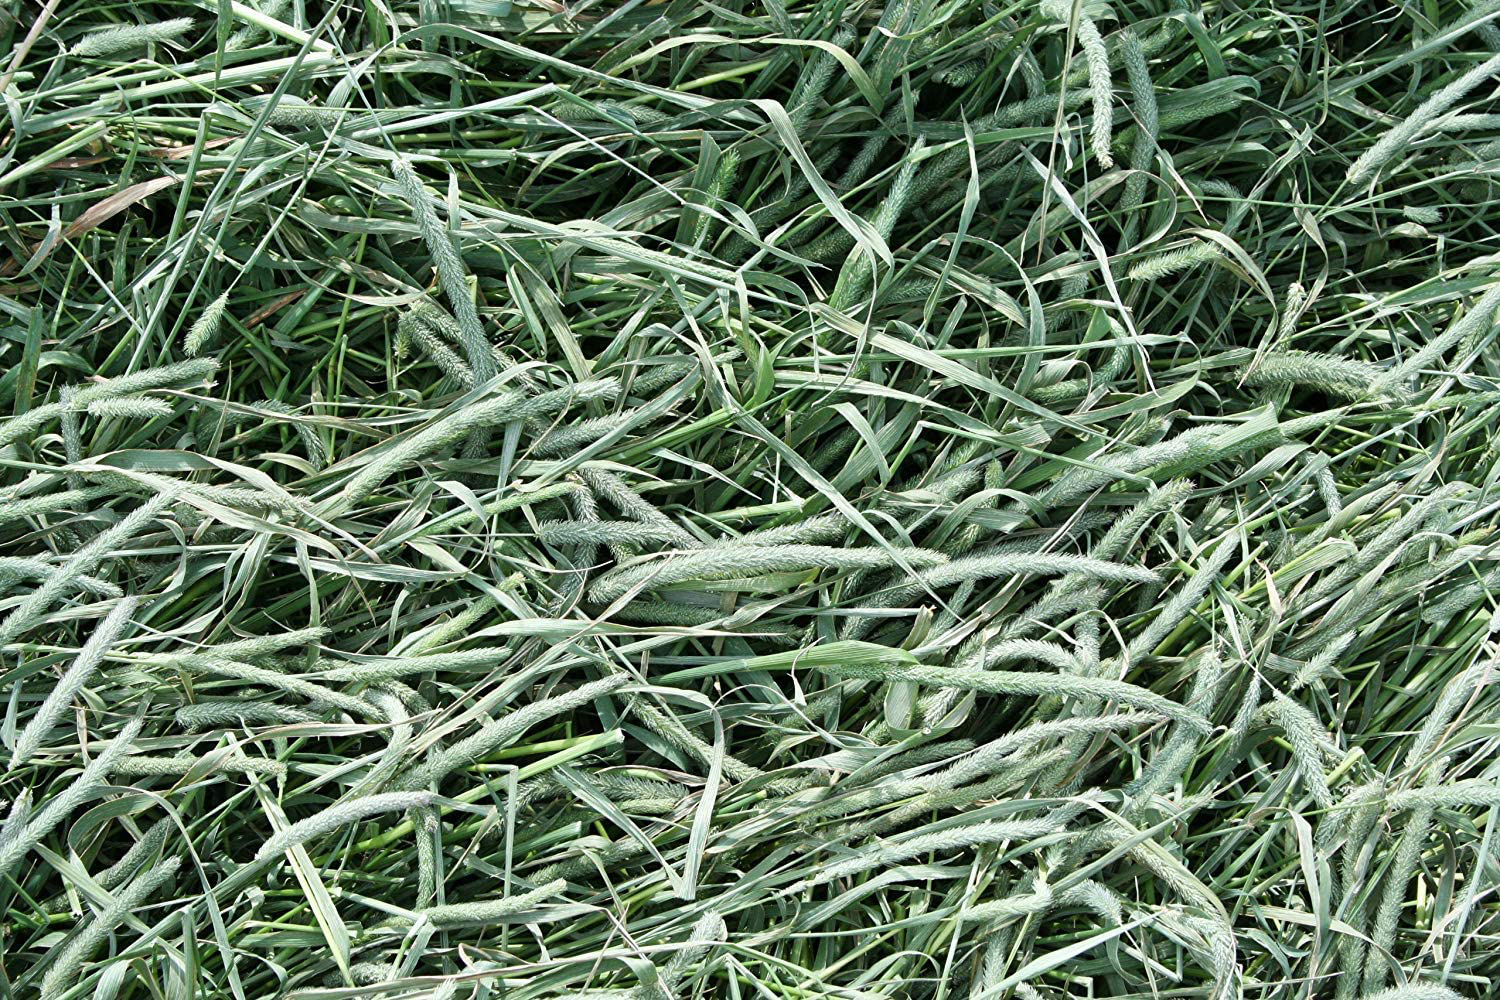 Standlee Hay Company Premium Timothy Grass Hand-Selected Forage, 25 Lb Box